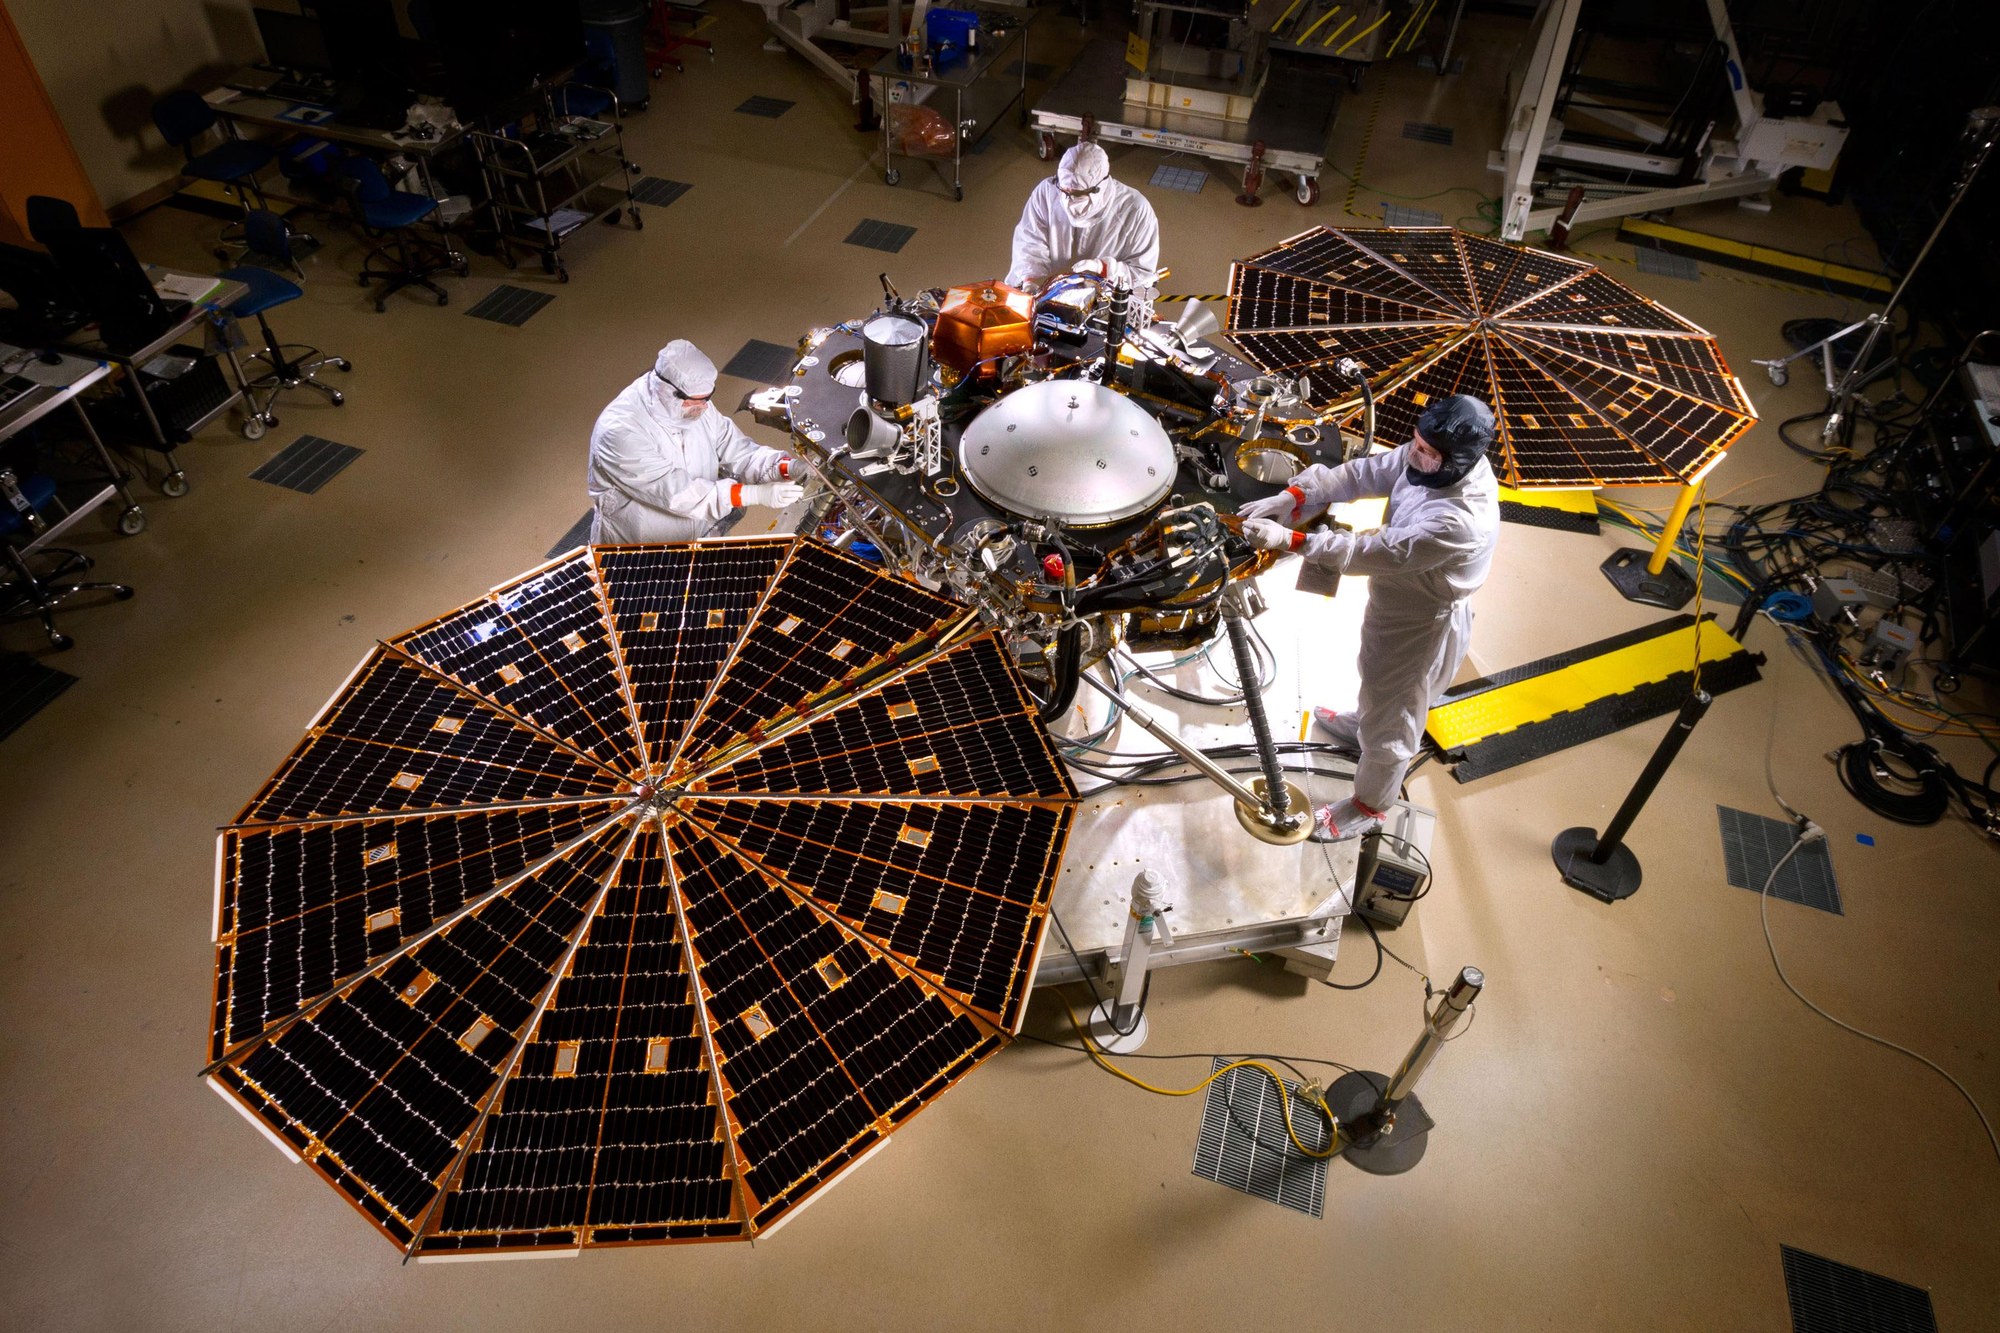 The InSight lander nearing its completion